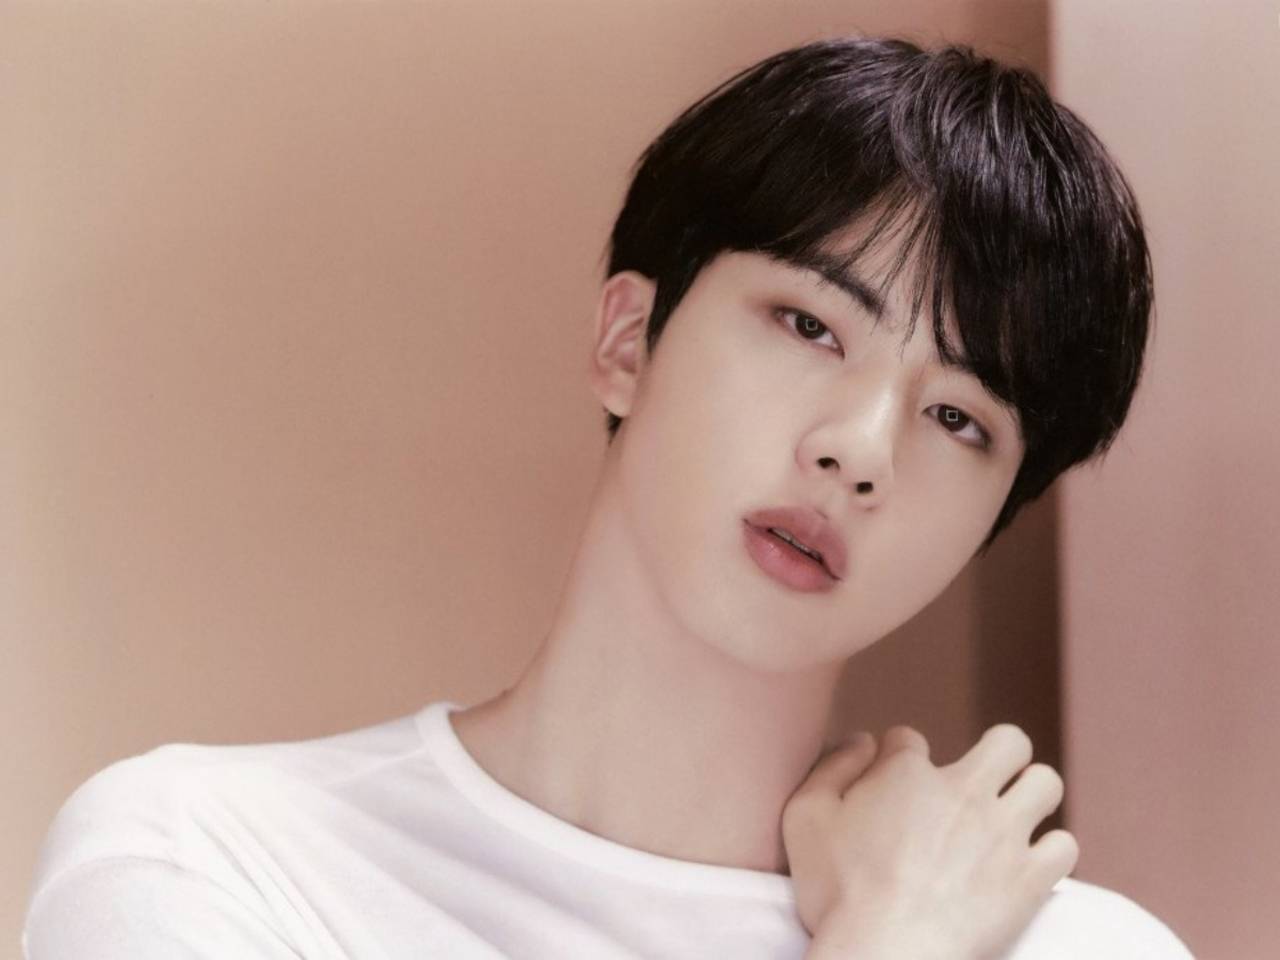 Bts Jin set to become an uncle; shows off sonography as he awaits the arrival of butter baby  image photo